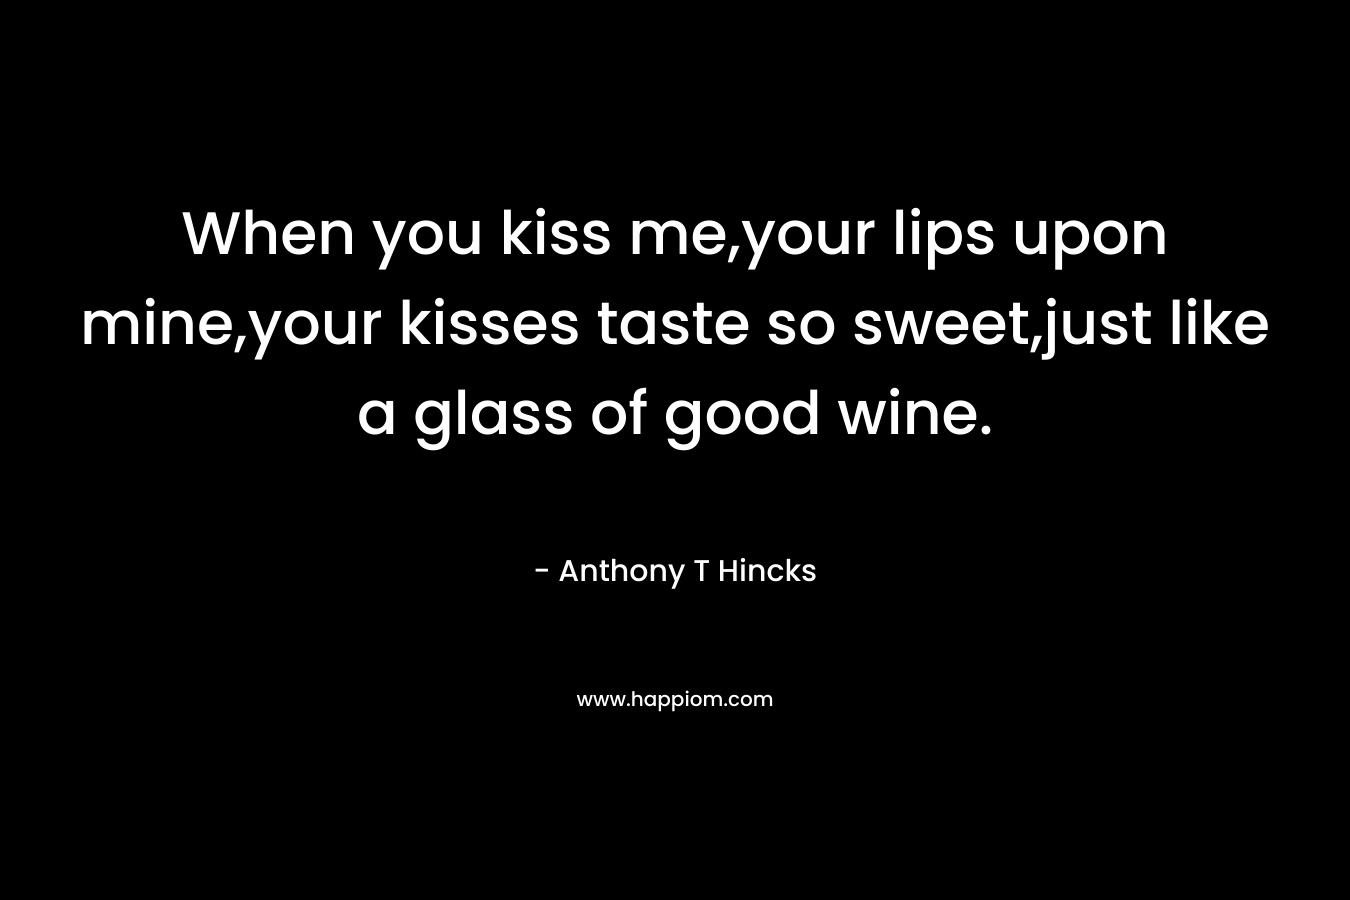 When you kiss me,your lips upon mine,your kisses taste so sweet,just like a glass of good wine.